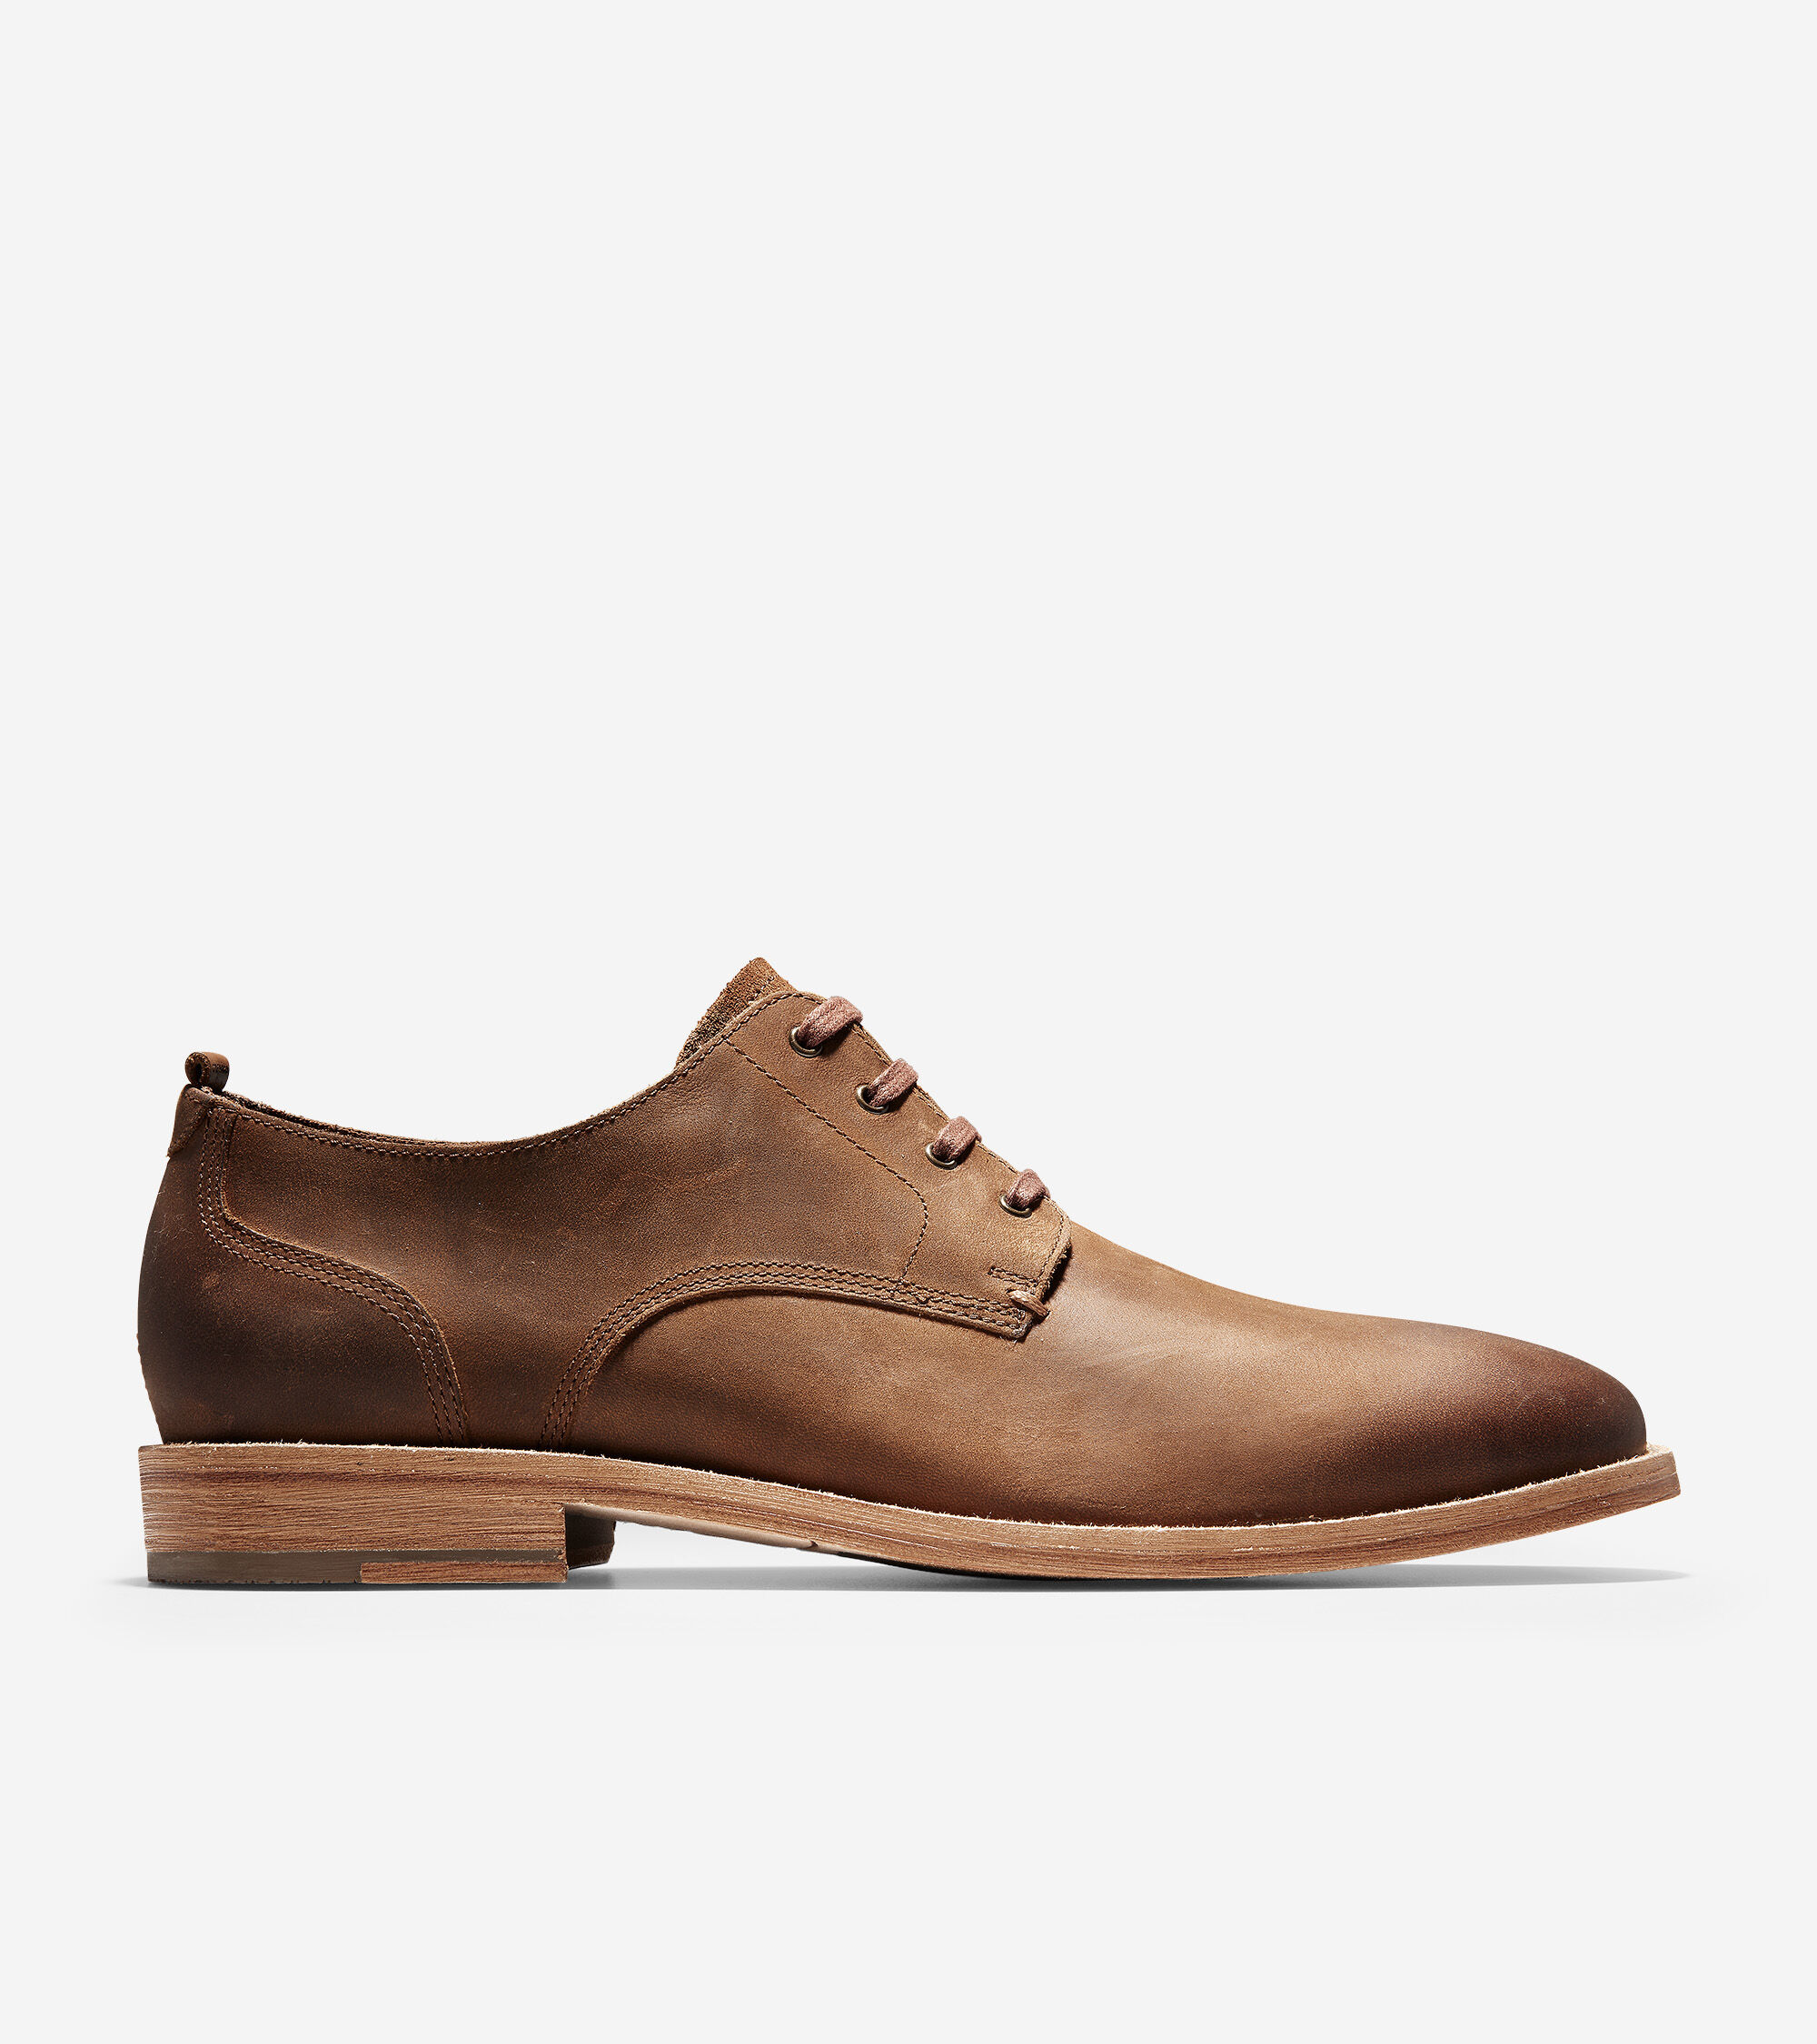 cole haan shoes women price